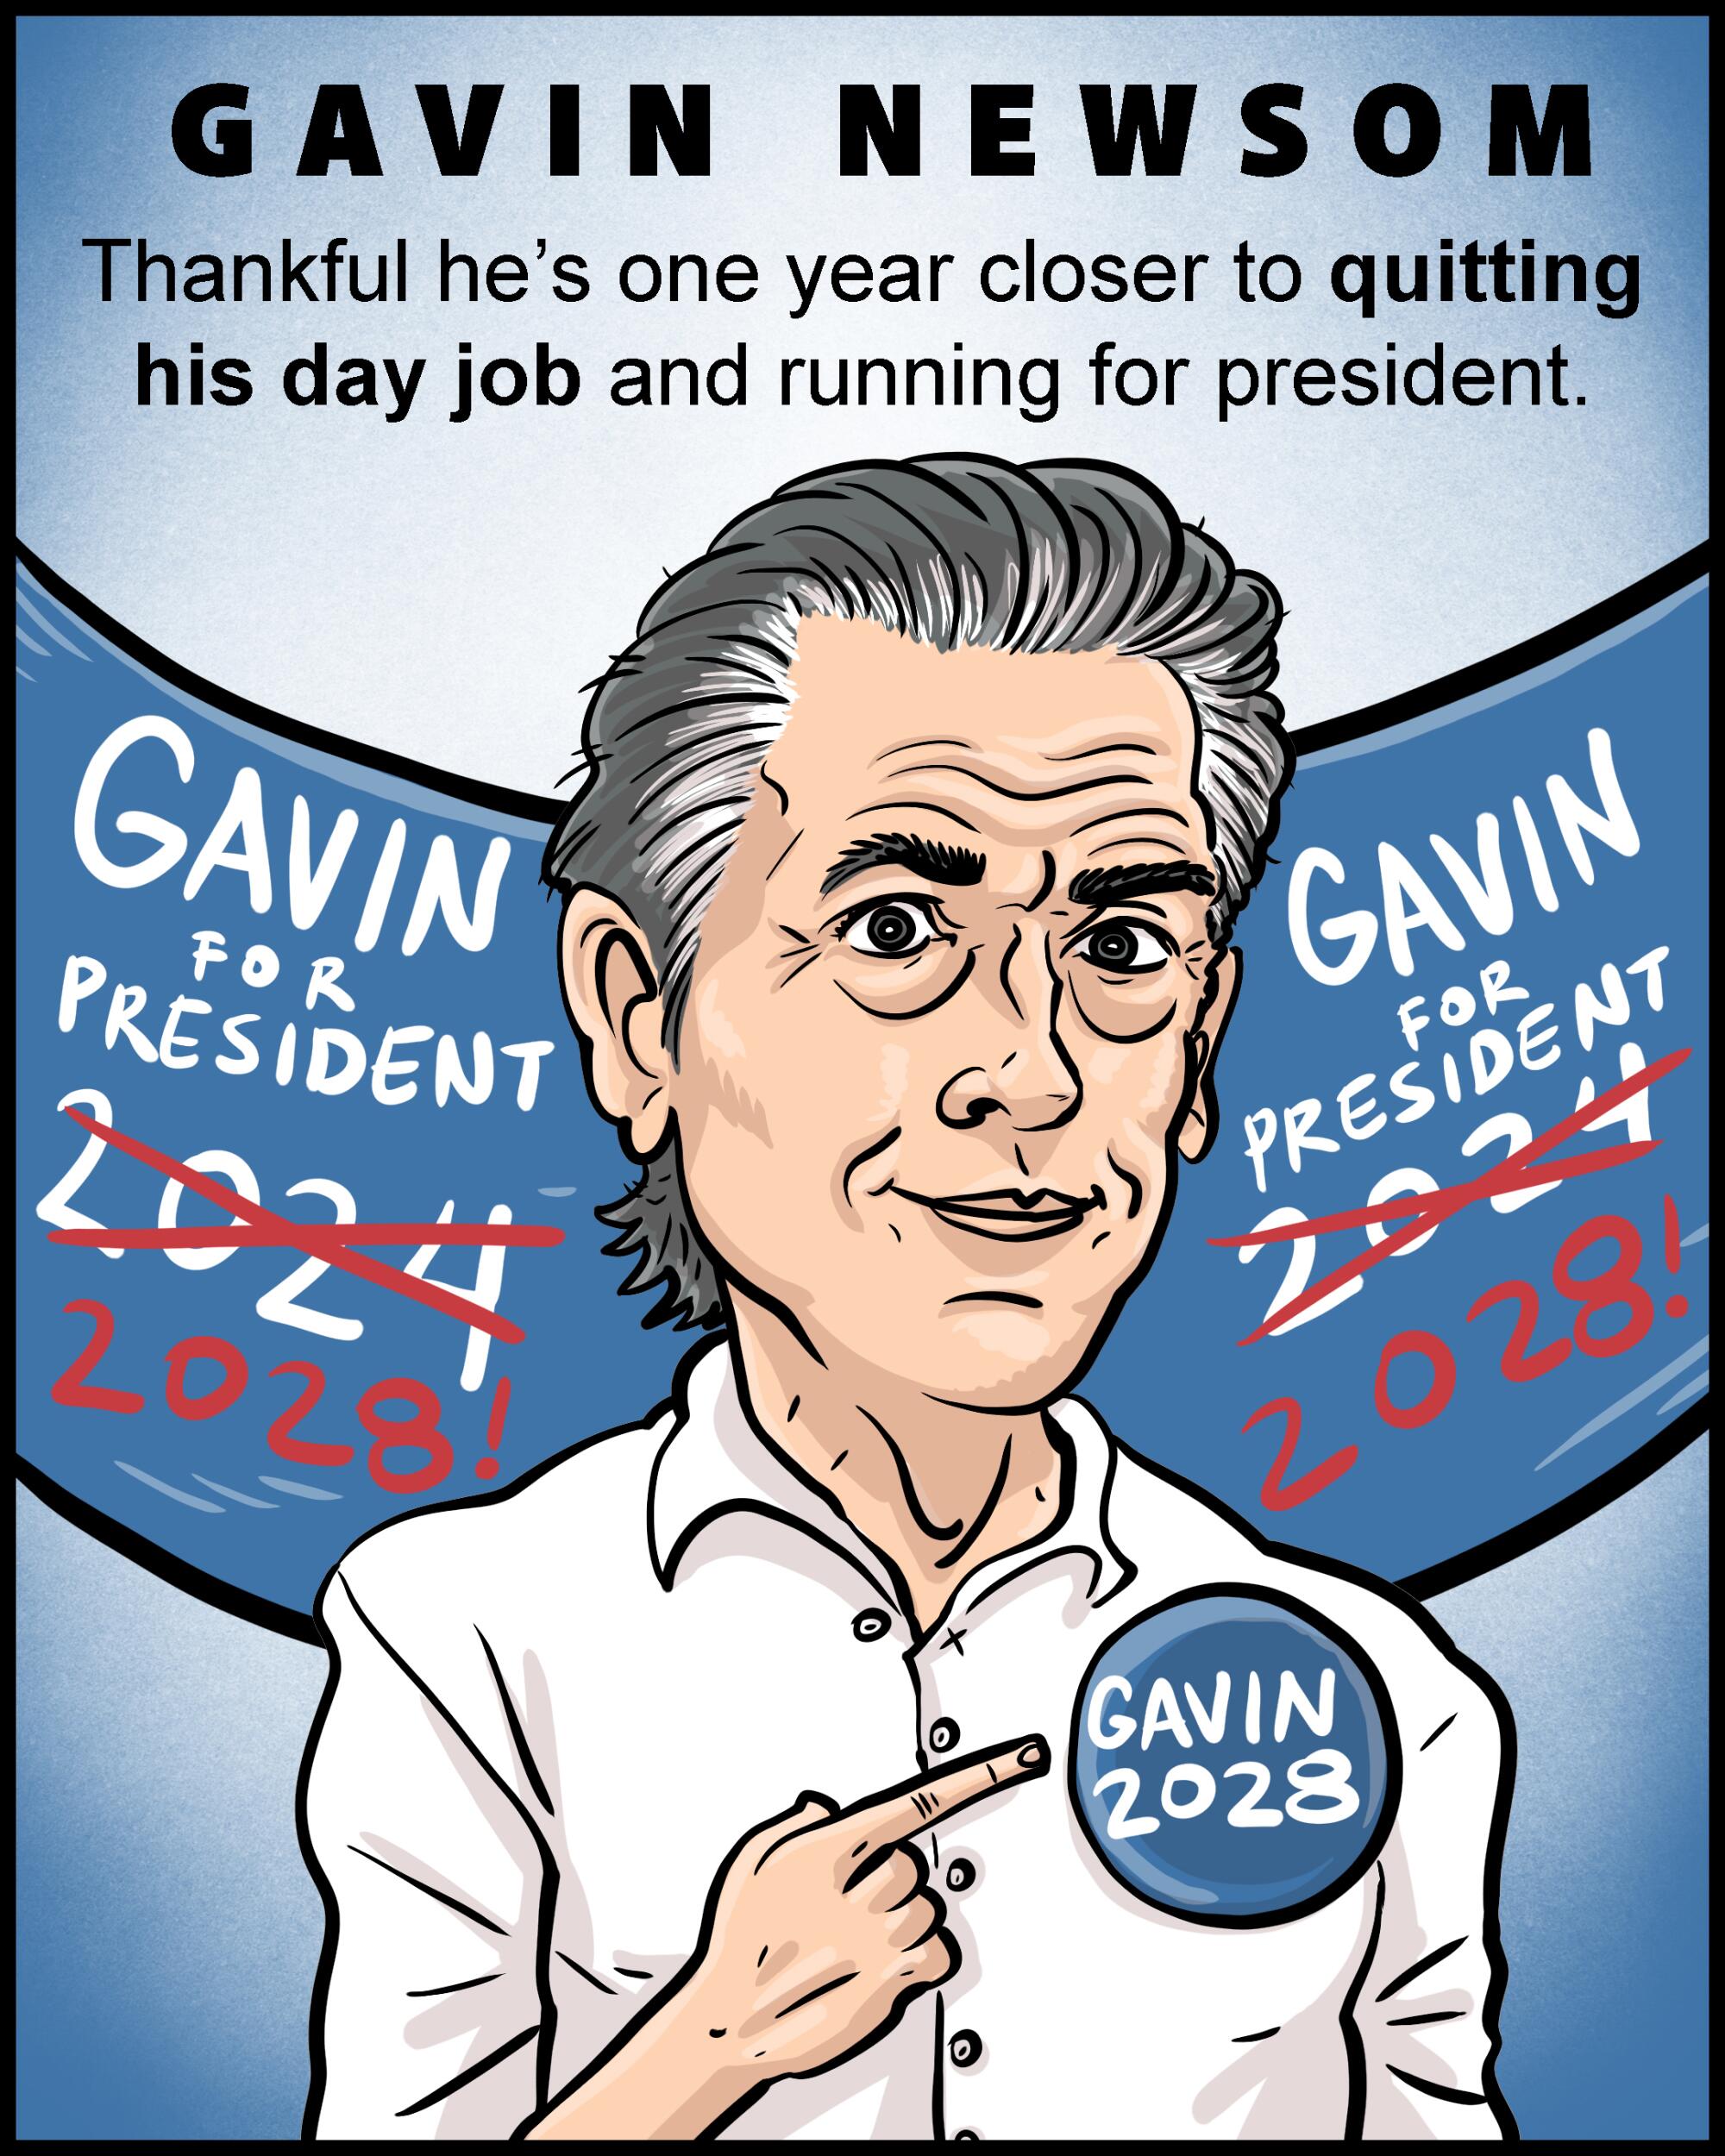 Gavin Newsom - Thankful he's one year closer to quitting his day job and running for president